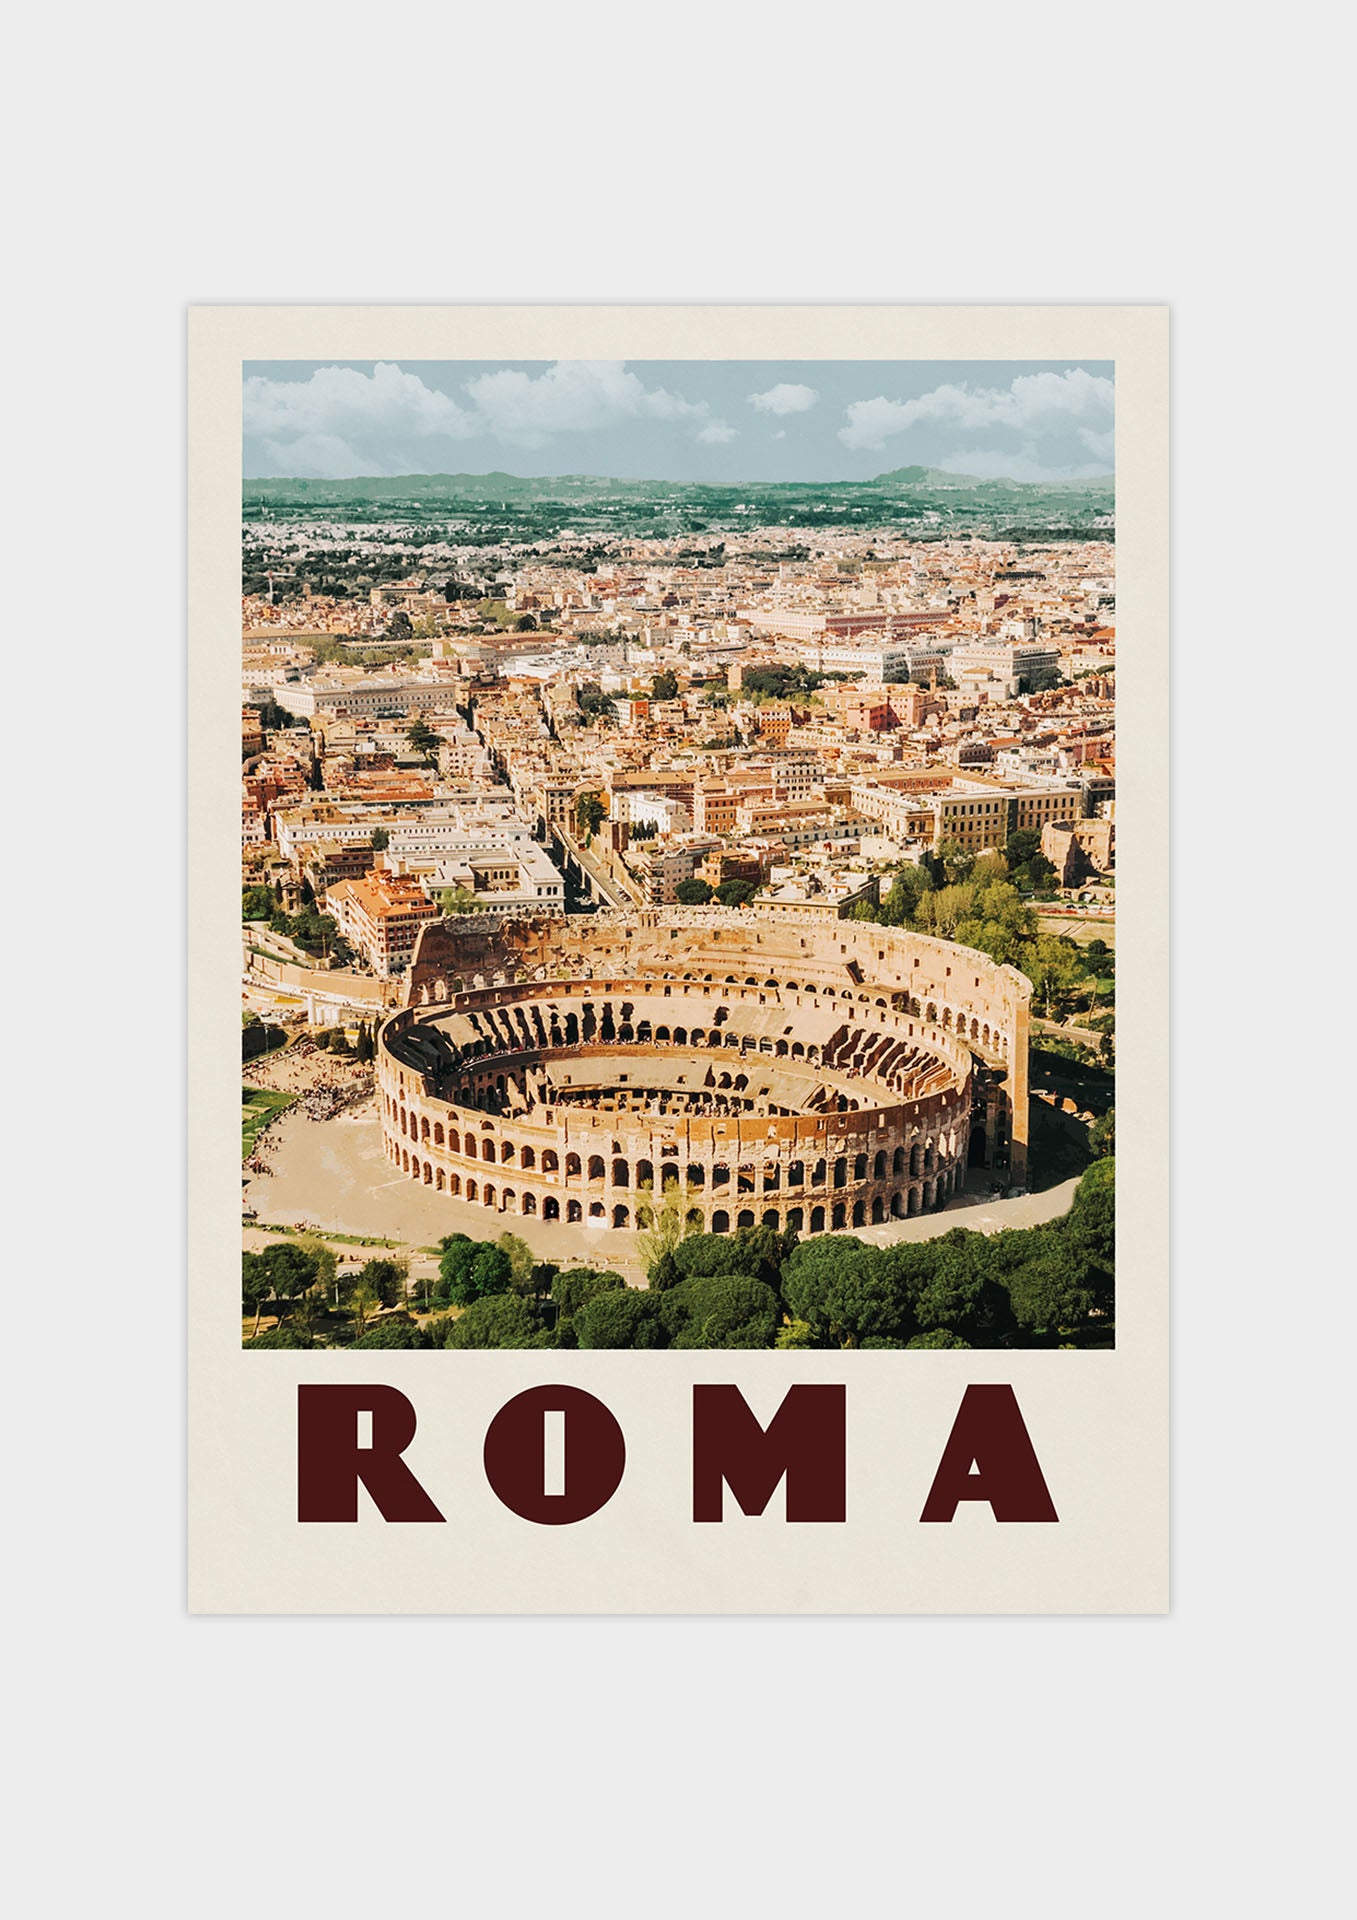 Rome, Italy - Vintage Travel Poster